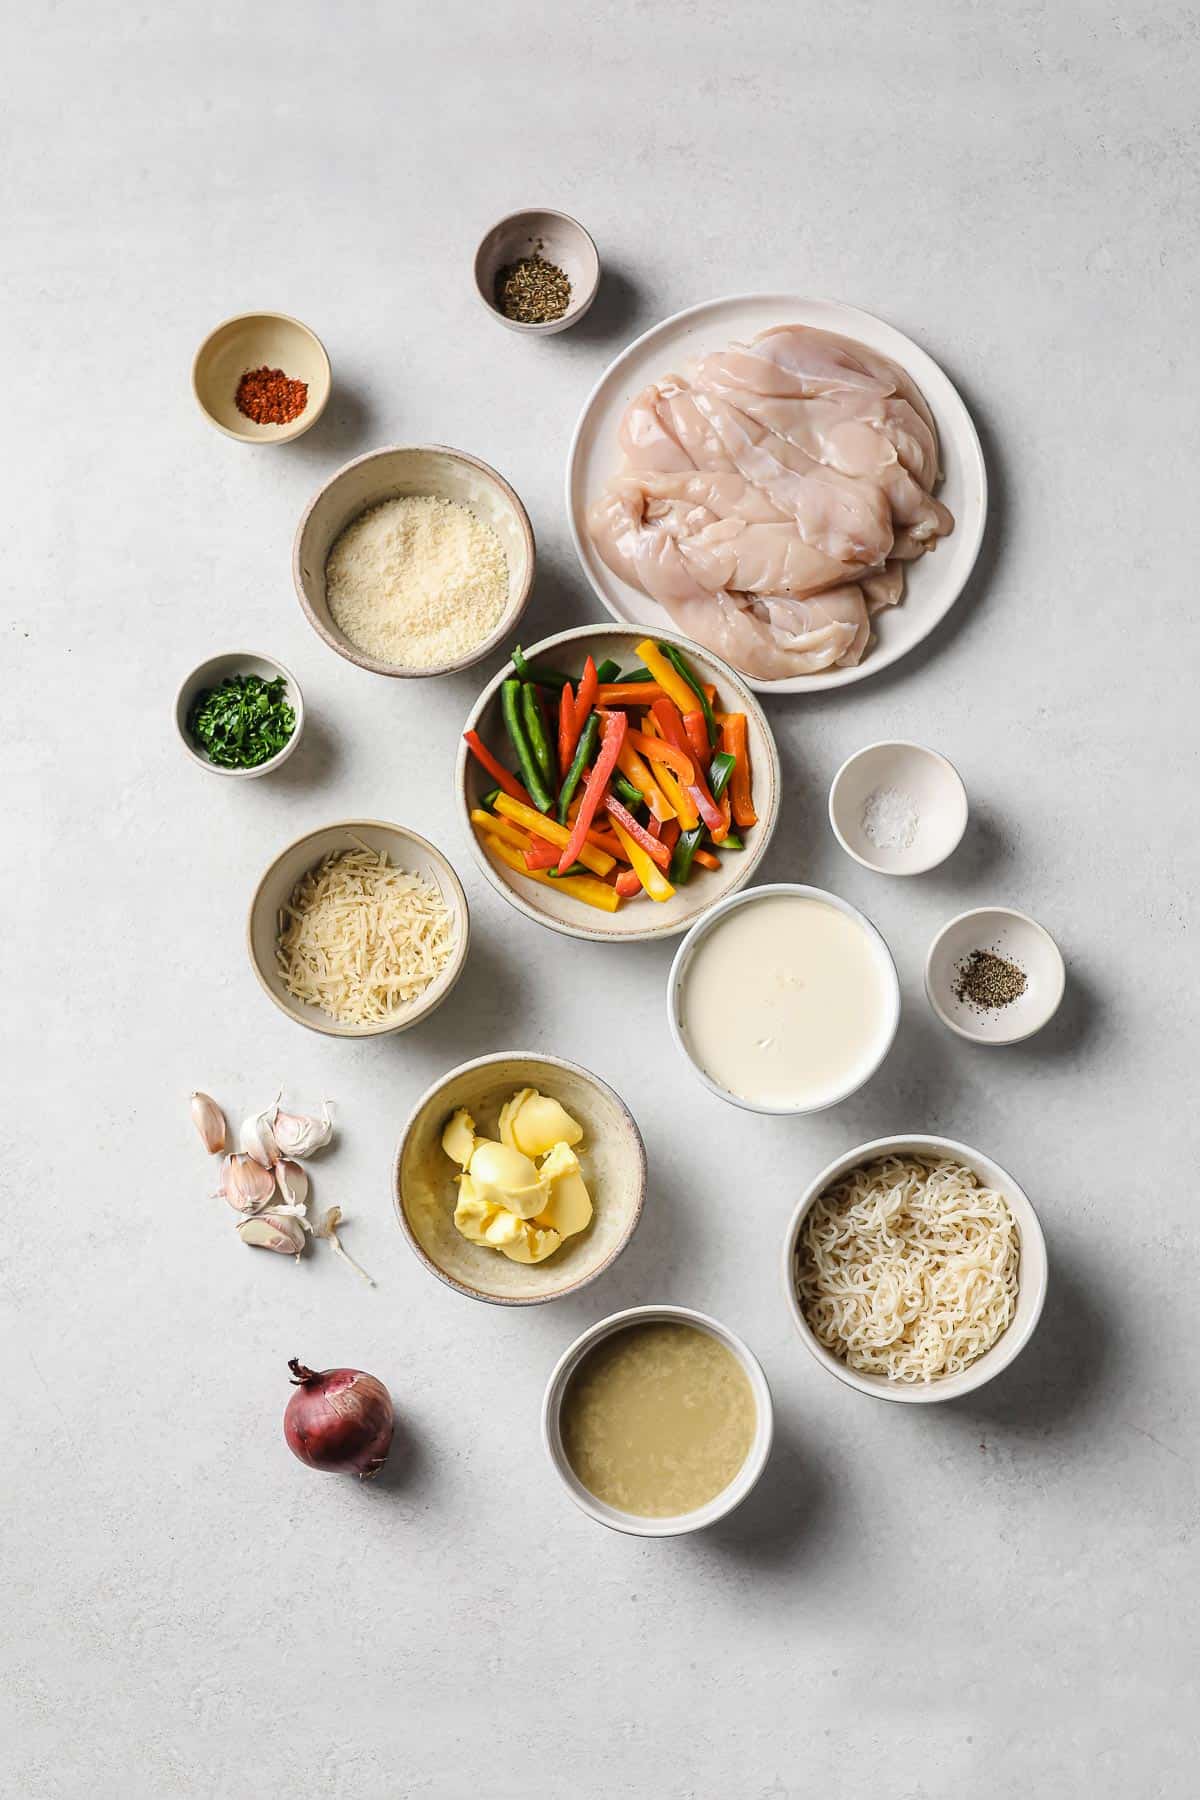 ingredients laid out in a spread - chicken, onion, peppers, cheese, garlic, butter, oil, broth, parsley, salt and pepper